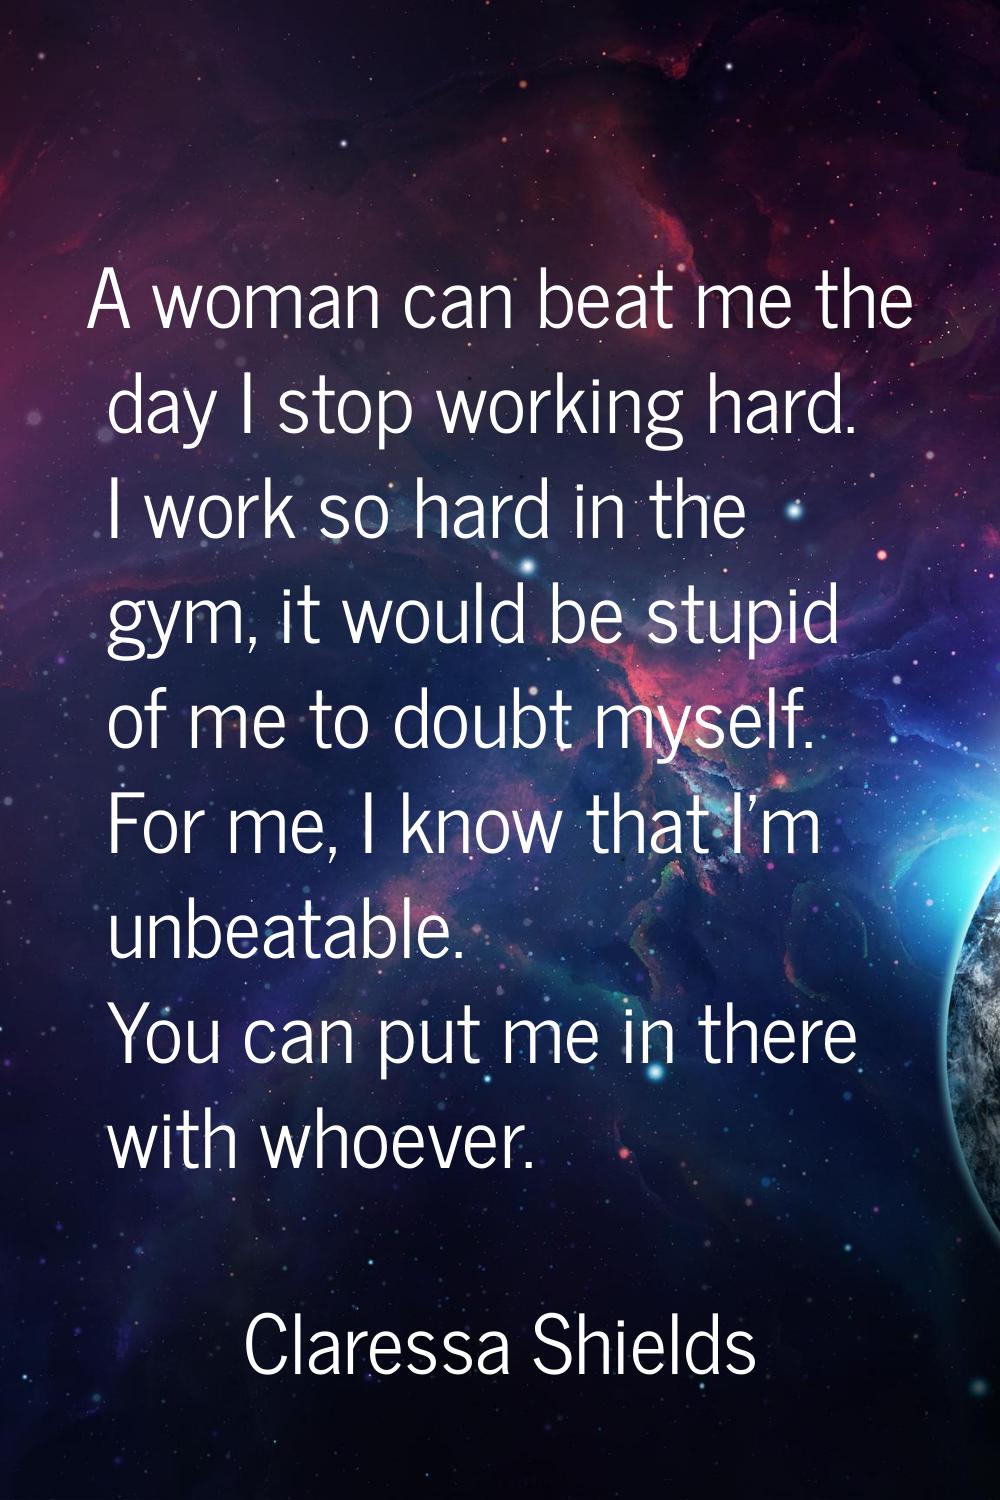 A woman can beat me the day I stop working hard. I work so hard in the gym, it would be stupid of m